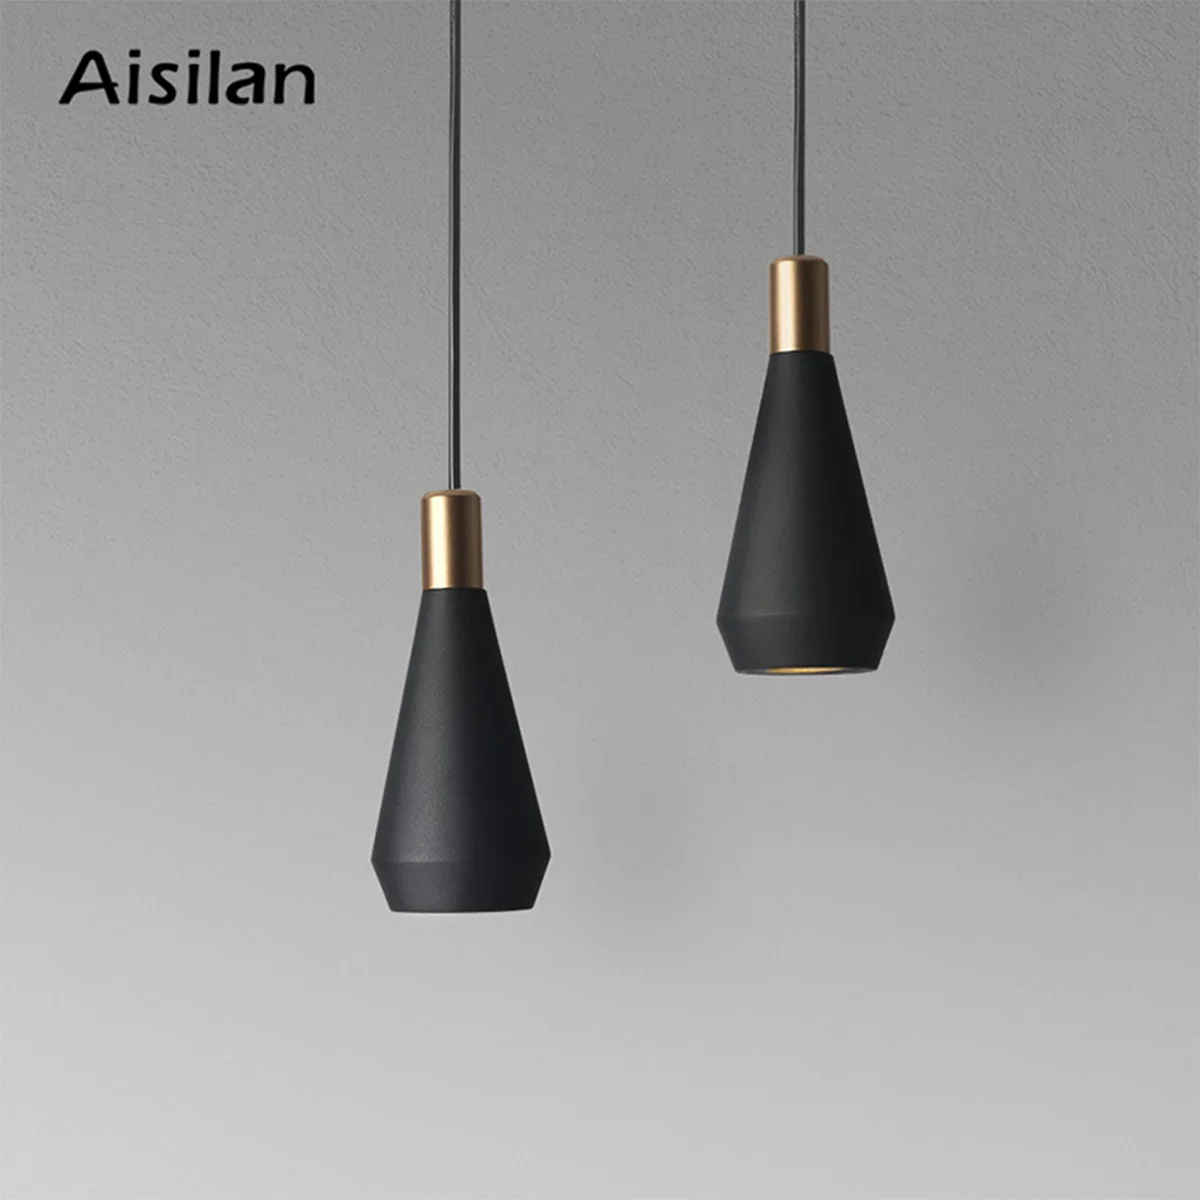 Aisilan LED Luxury Pendant Lamp Modern Kitchen Bedroom Table Dining Room... - $60.61